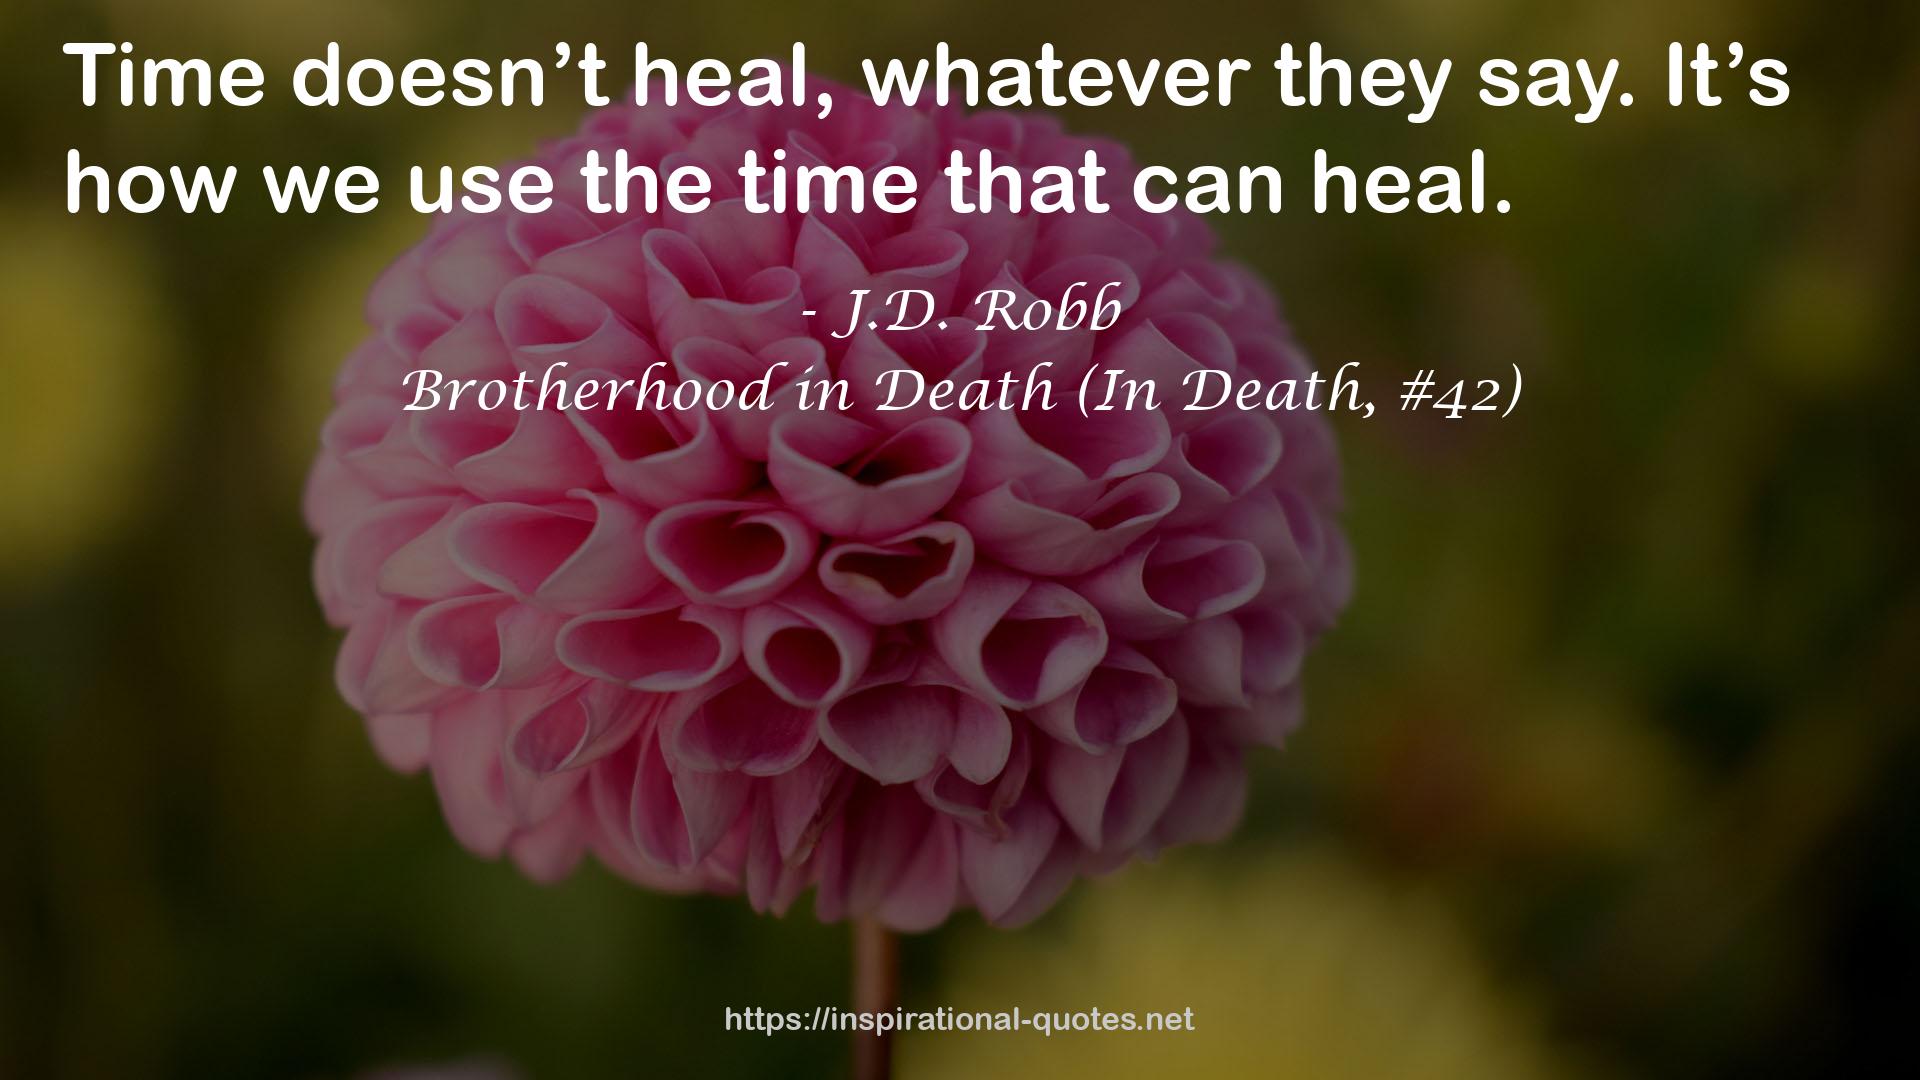 Brotherhood in Death (In Death, #42) QUOTES